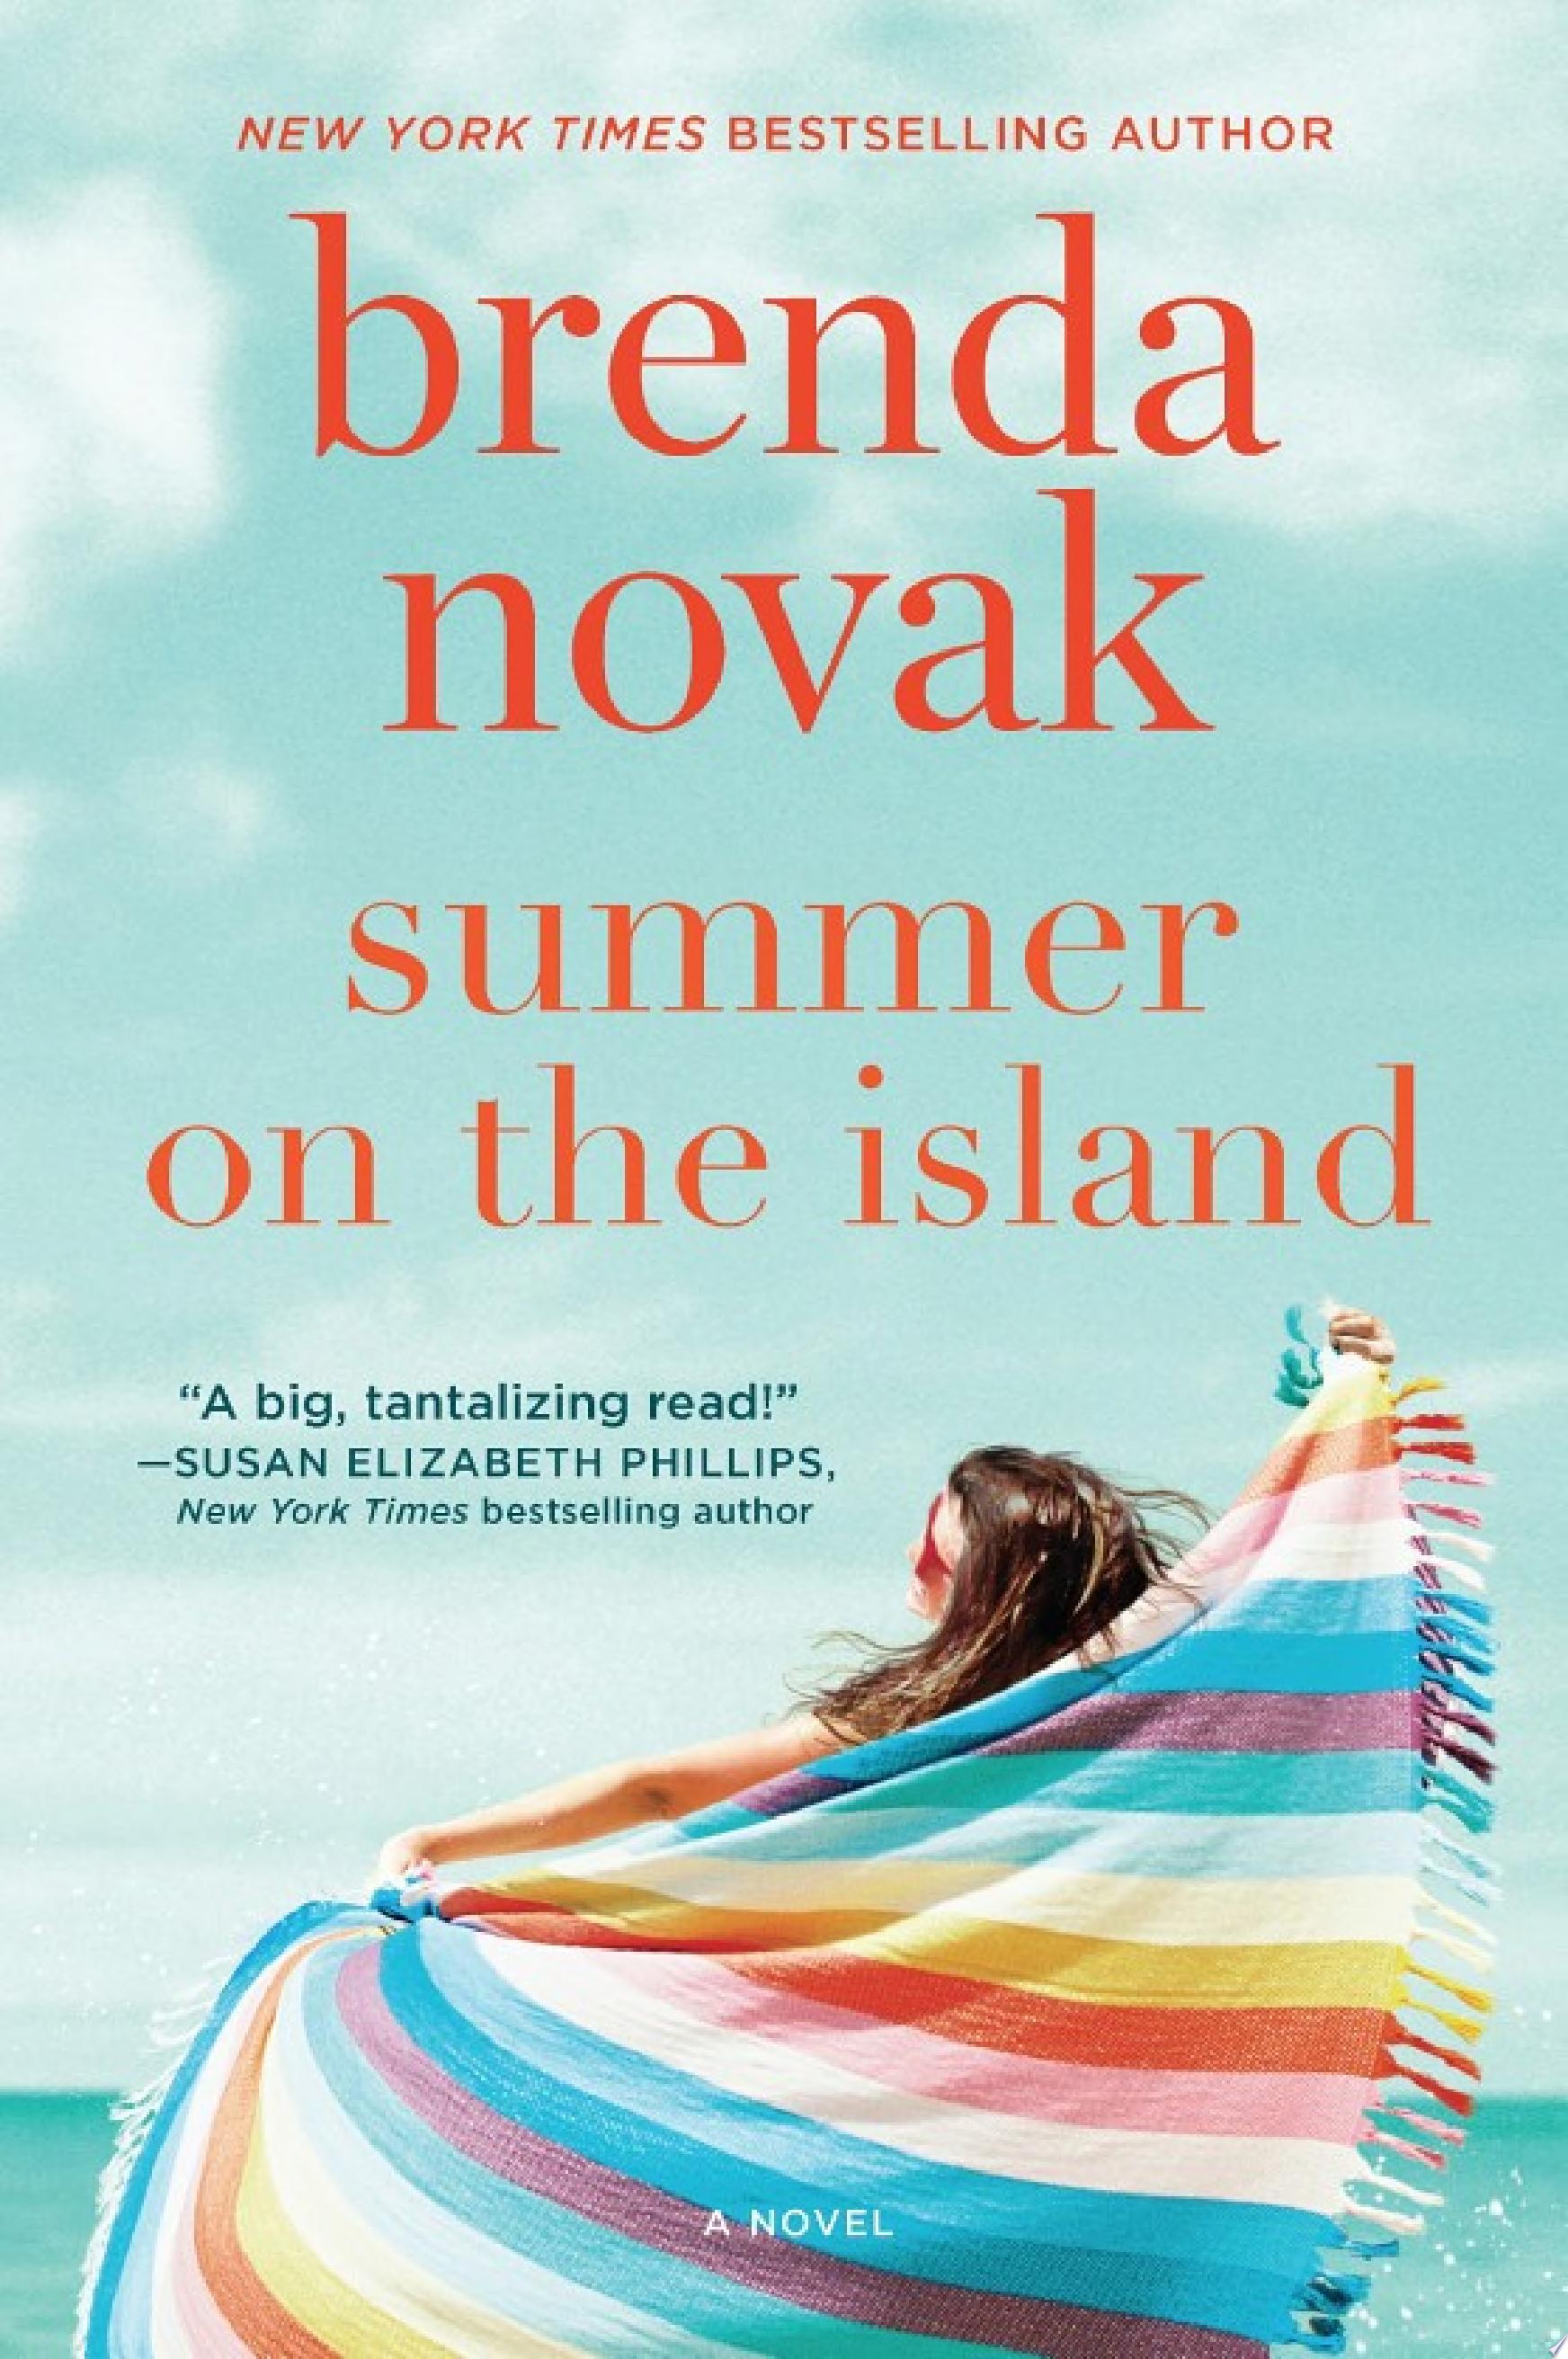 Image for "Summer on the Island"